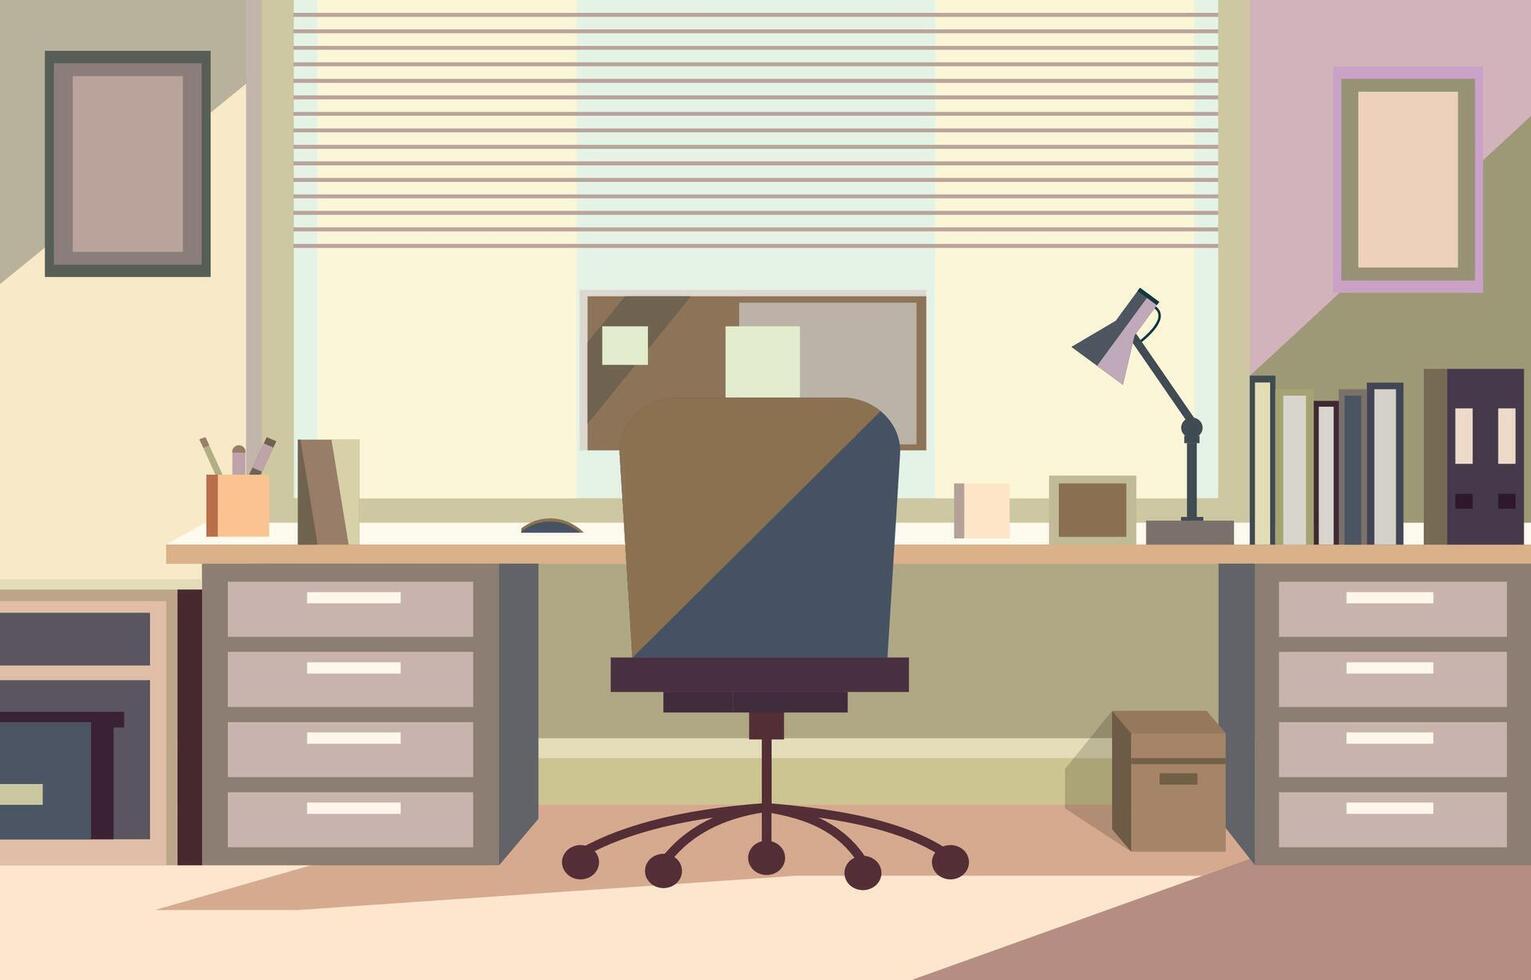 Flat Vector Design of Workplace Landscape in the Office with Computer and Books on a Desk